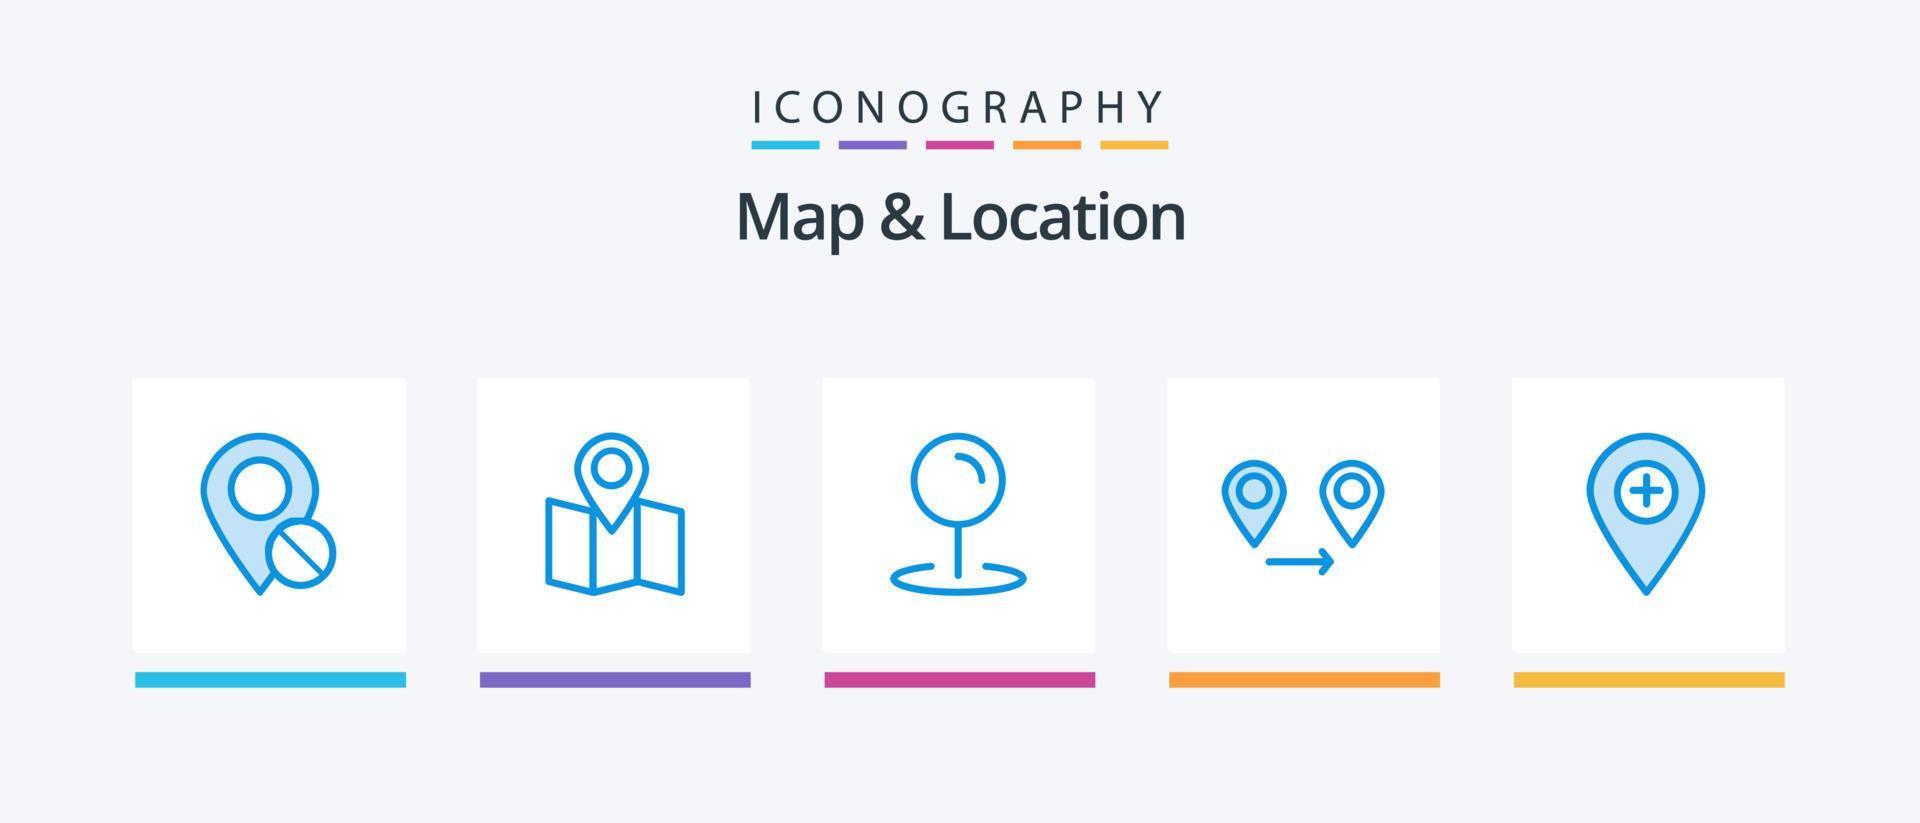 Map and Location Blue 5 Icon Pack Including . pin. gps. marker. location. Creative Icons Design vector